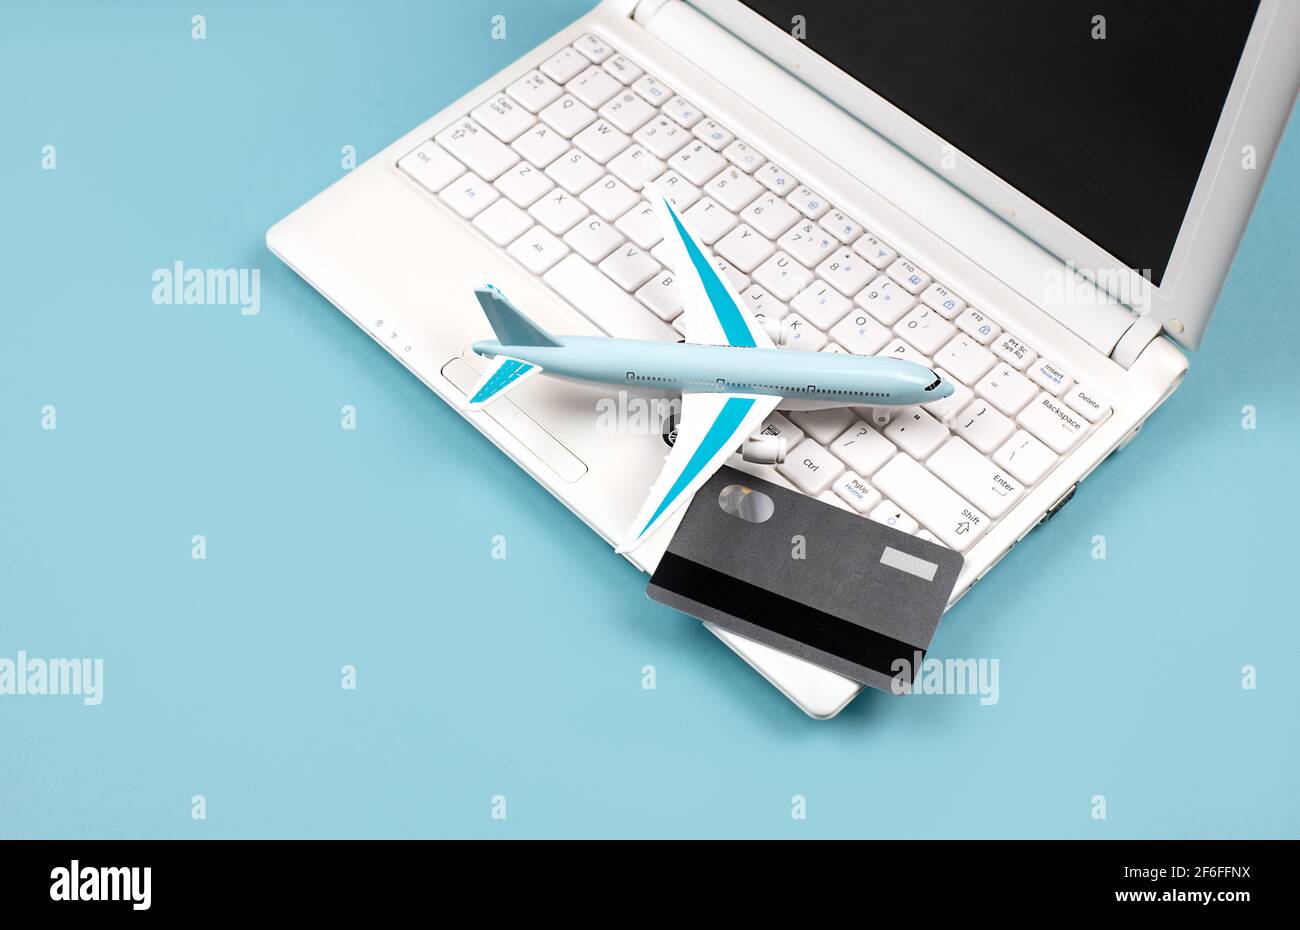 White laptop on a blue background. Nearby is a bank card and a miniature airplane. Concept - Online booking of air tickets, travel planning. Stock Photo